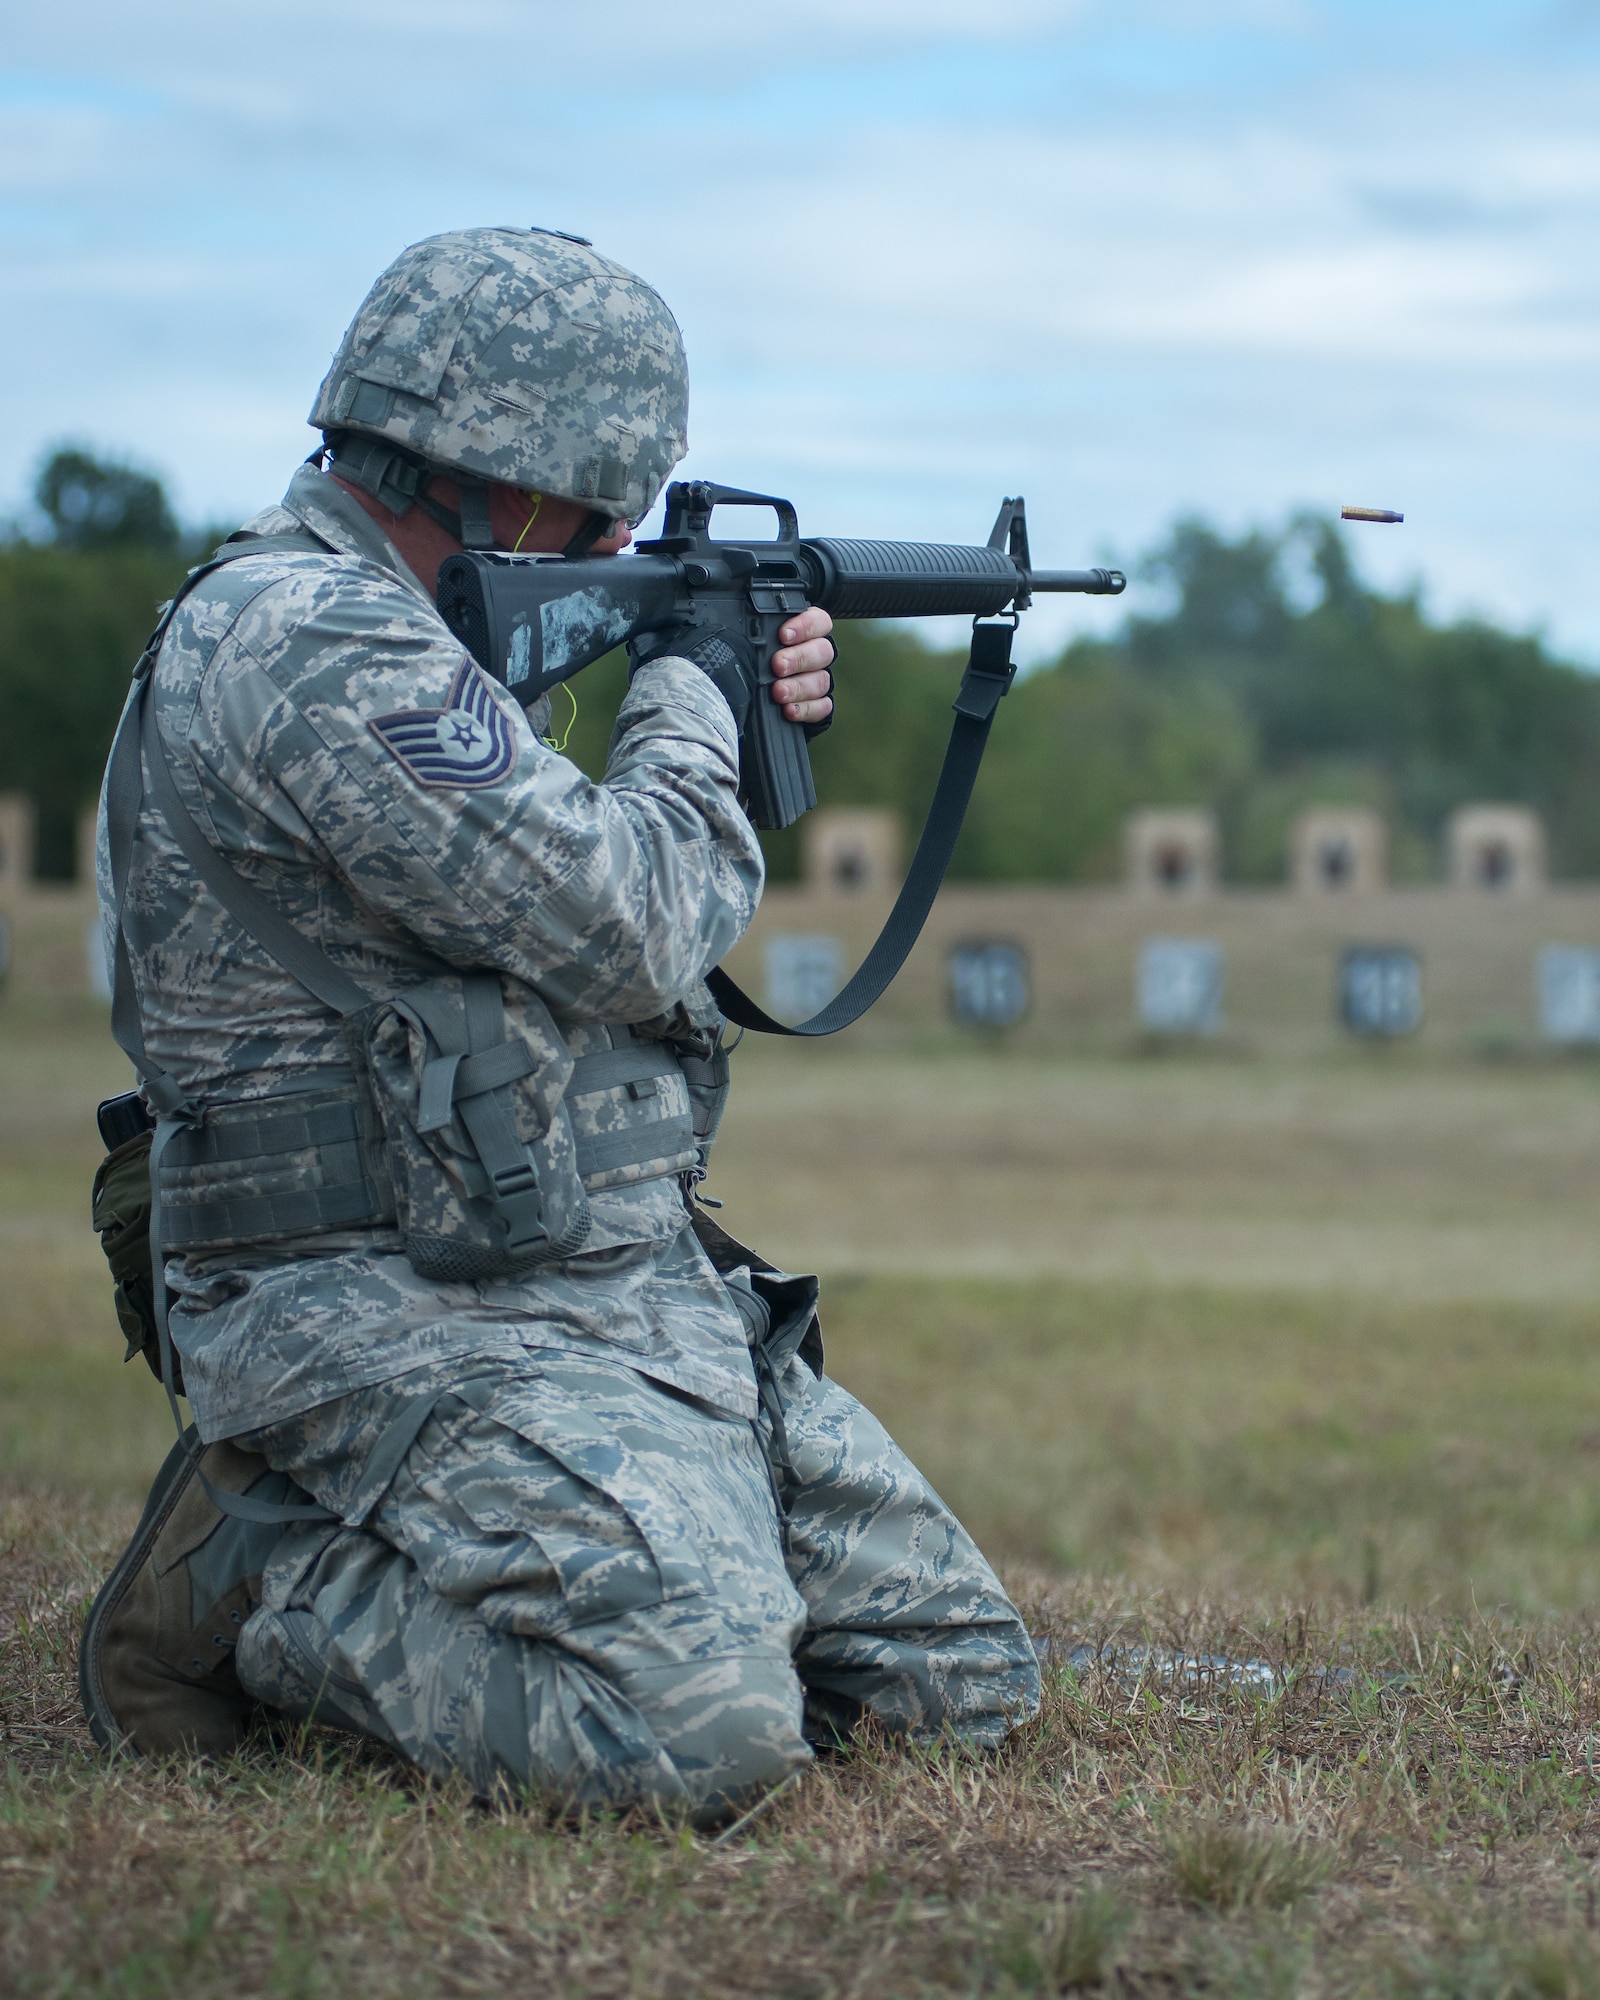 M-16 assault rifle portion of the competition